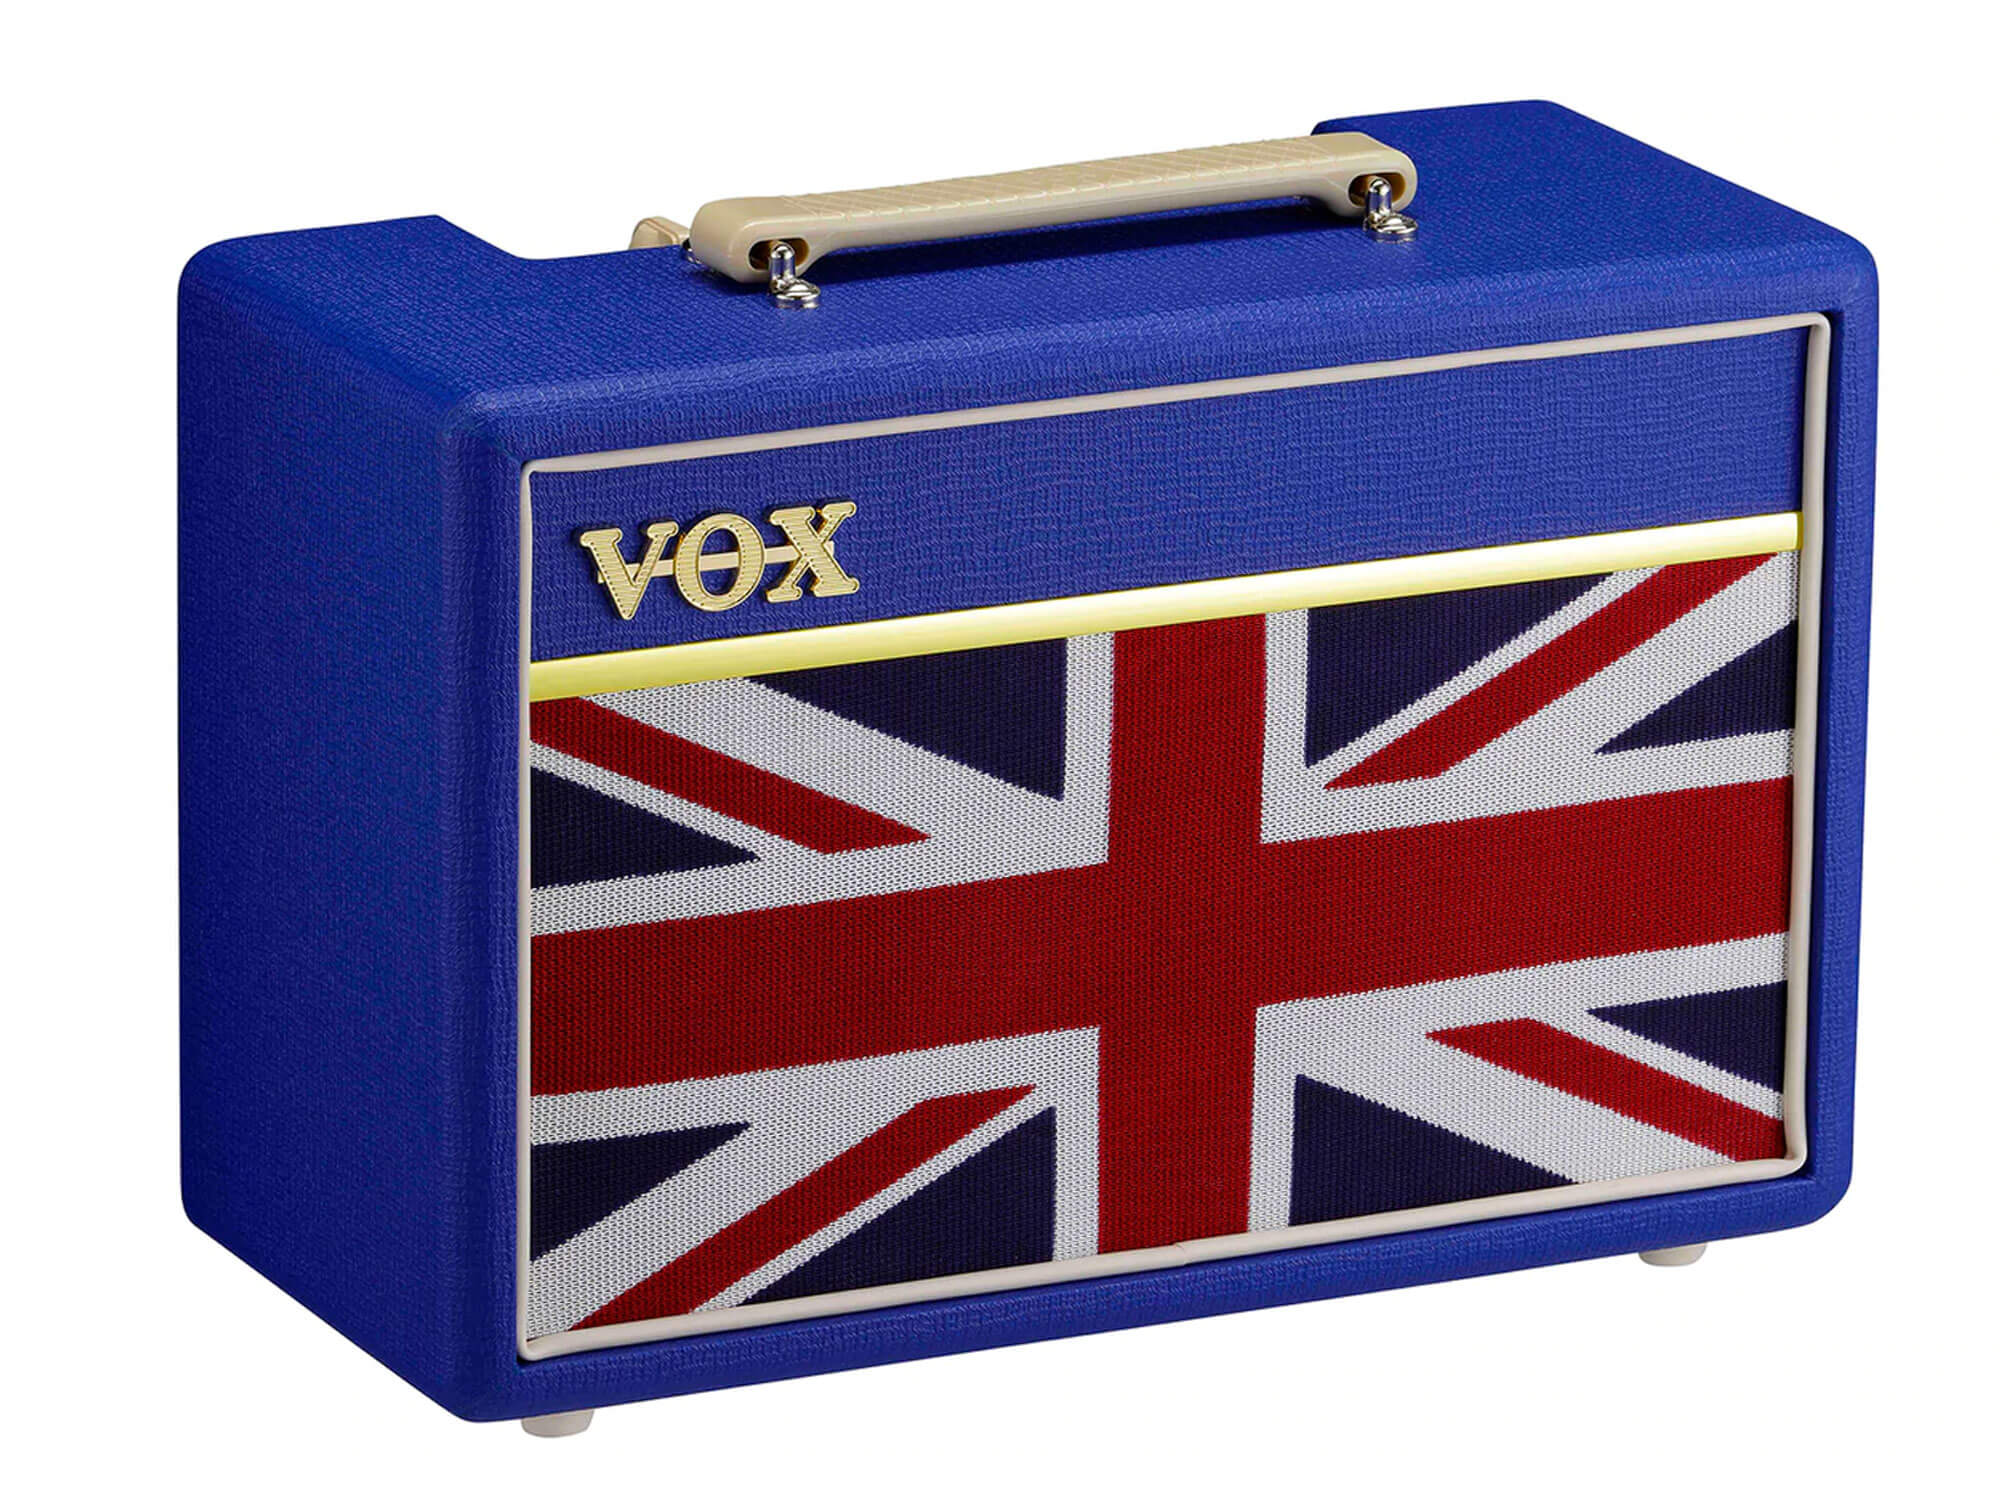 Vox launches its Pathfinder 10 amp in a Union Jack finish to celebrate the  Queen's Platinum Jubilee | Guitar.com | All Things Guitar